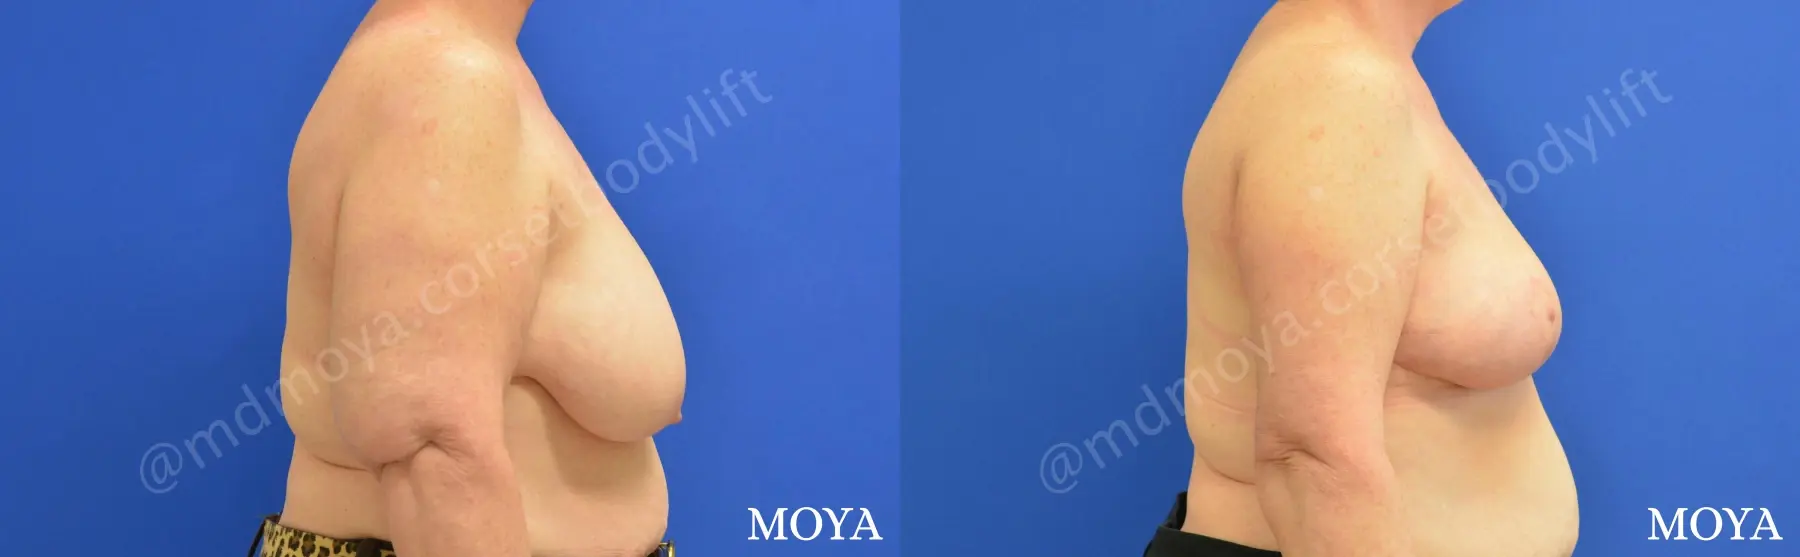 Upper Body Lift without Implants - Before and After 2